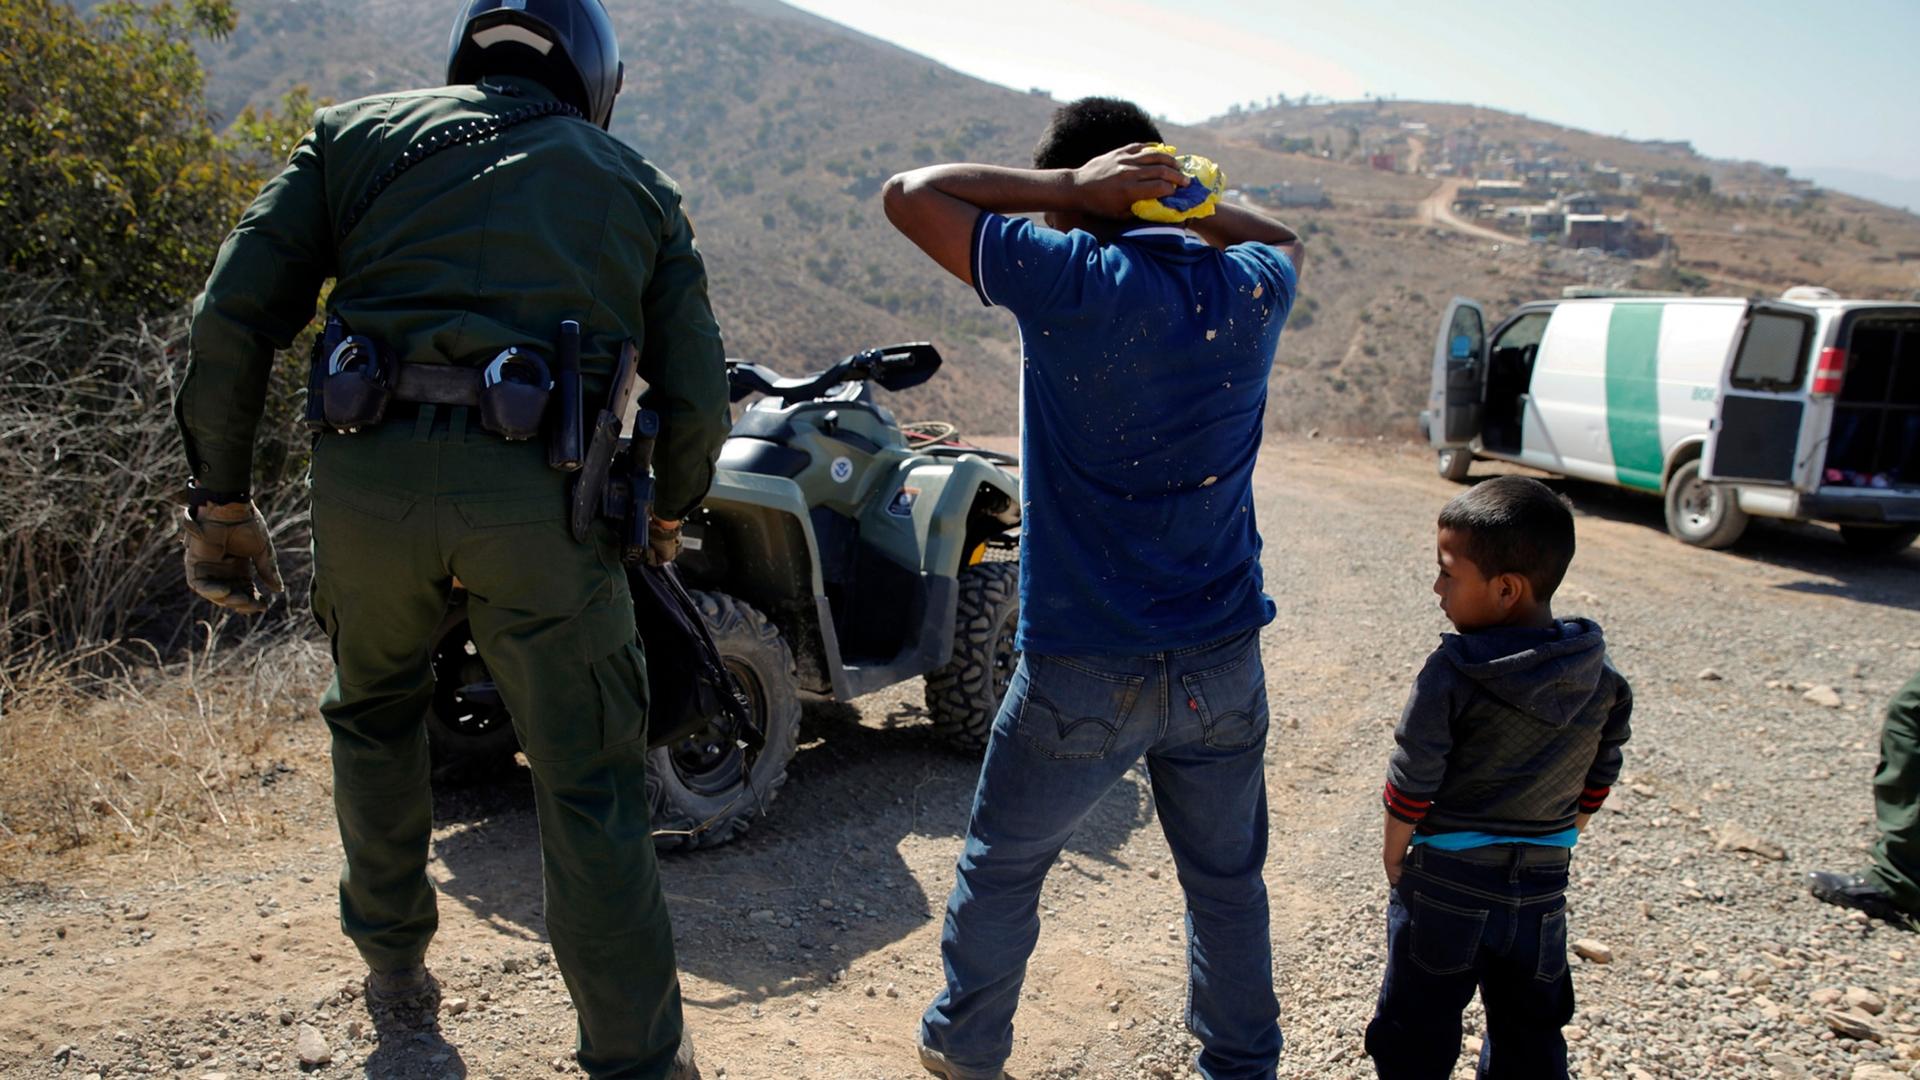 A man is shown with his hands behind his head as he is apprehended by a US border agent while a small boy is standing nearby.